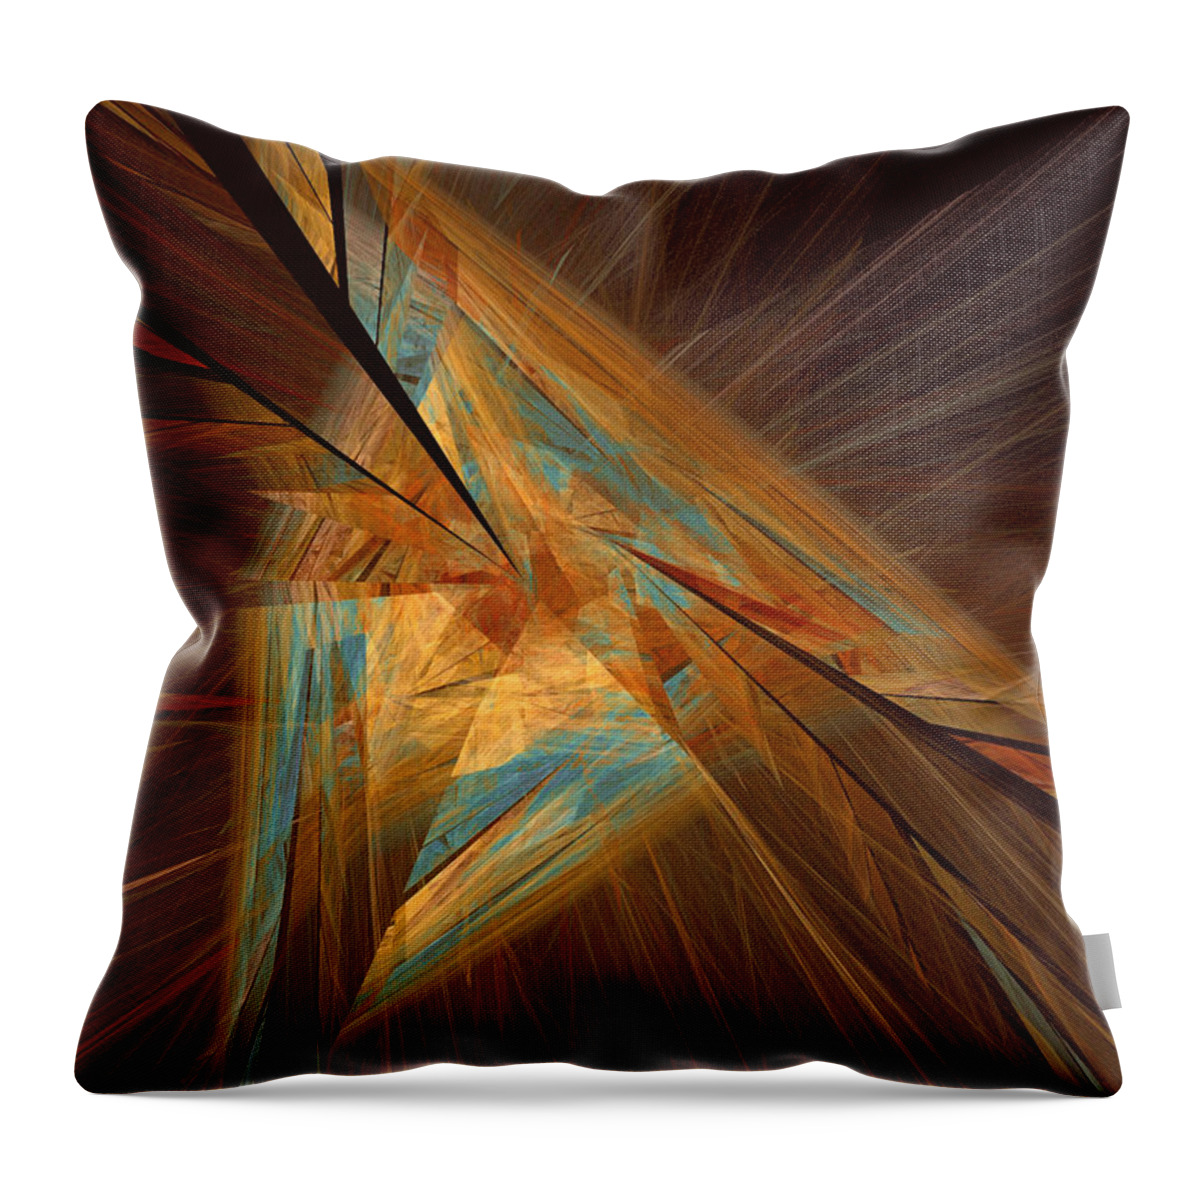 Abstract Throw Pillow featuring the digital art Inlaid by Rein Nomm